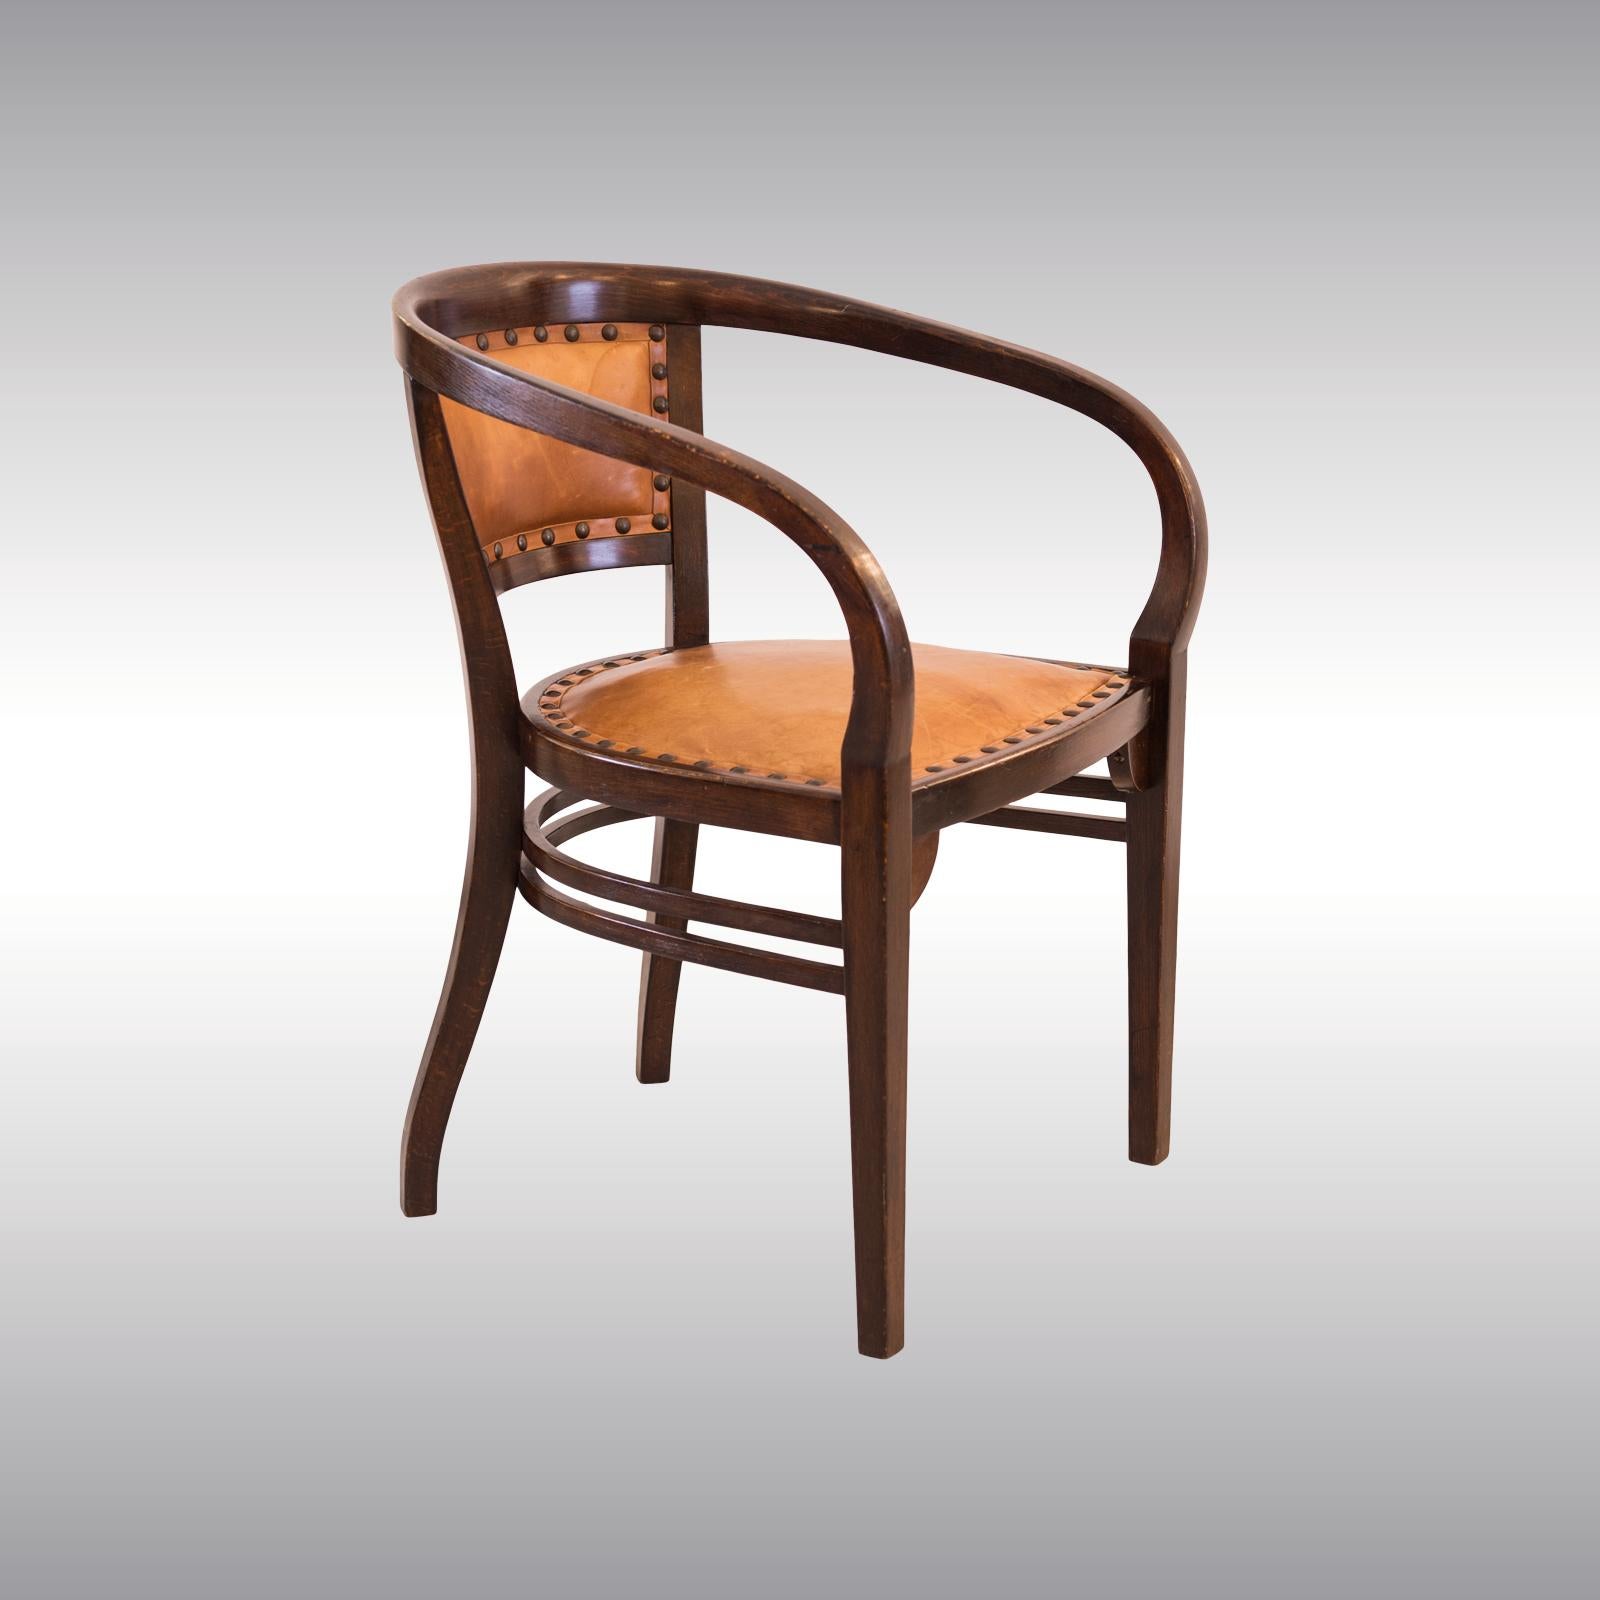 Austrian Extremely Rare and Beautiful Otto Wagner Chair by Thonet Vienna 1901 Jugendstil For Sale